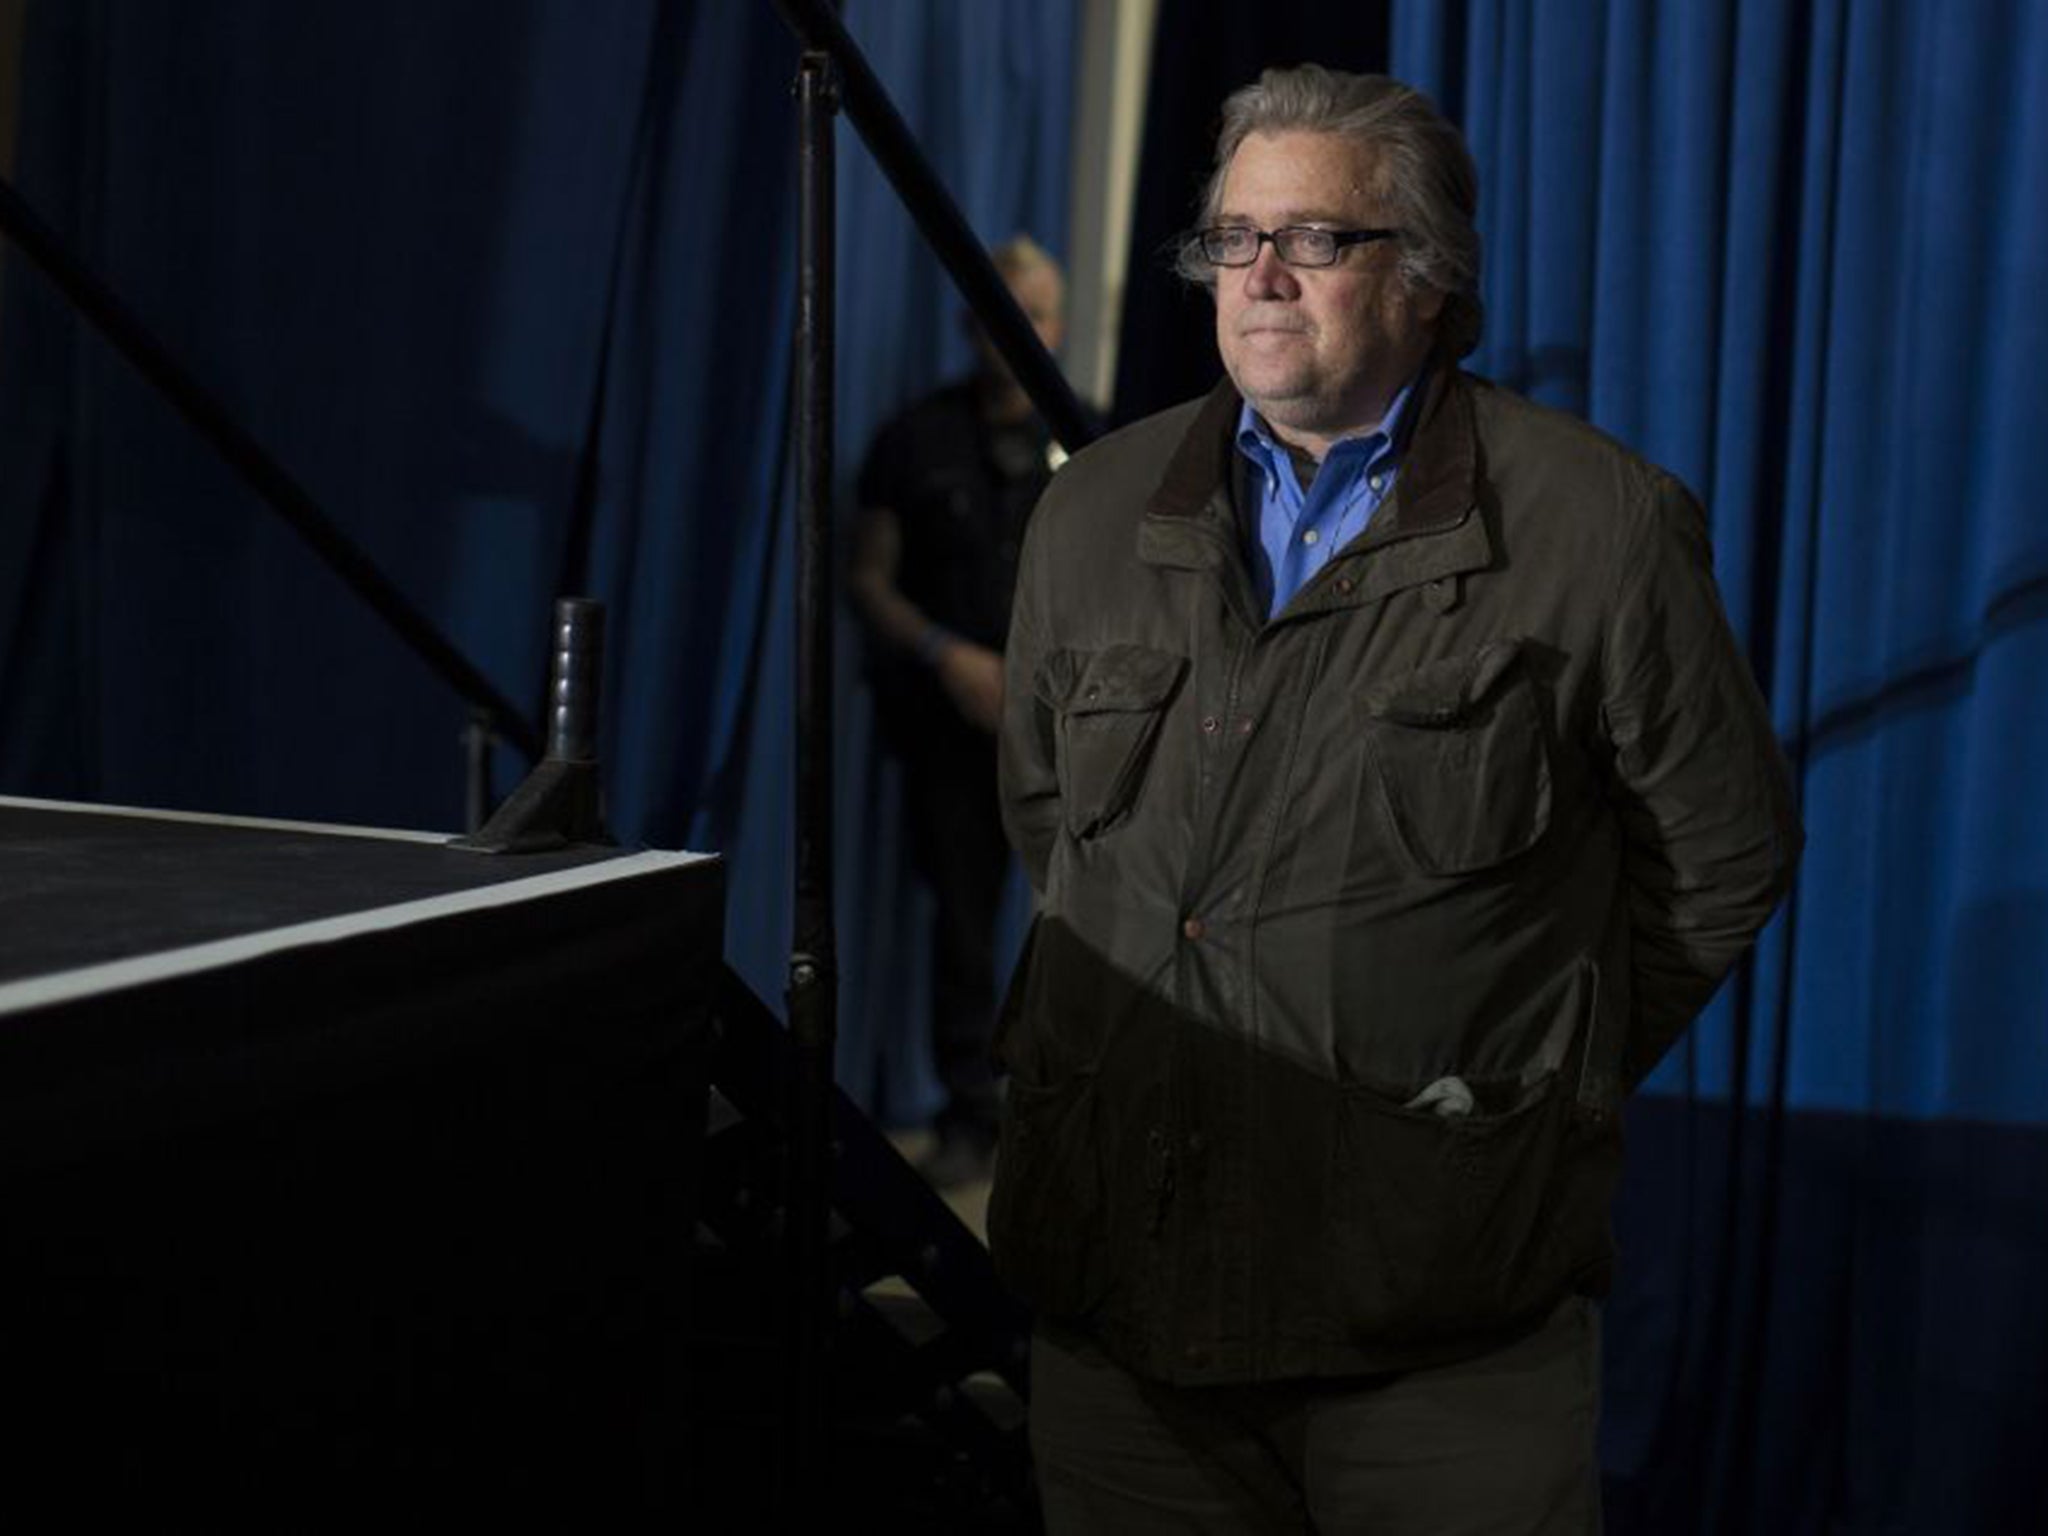 Steve Bannon looks on as Donald Trump speaks during a campaign rally earlier this month